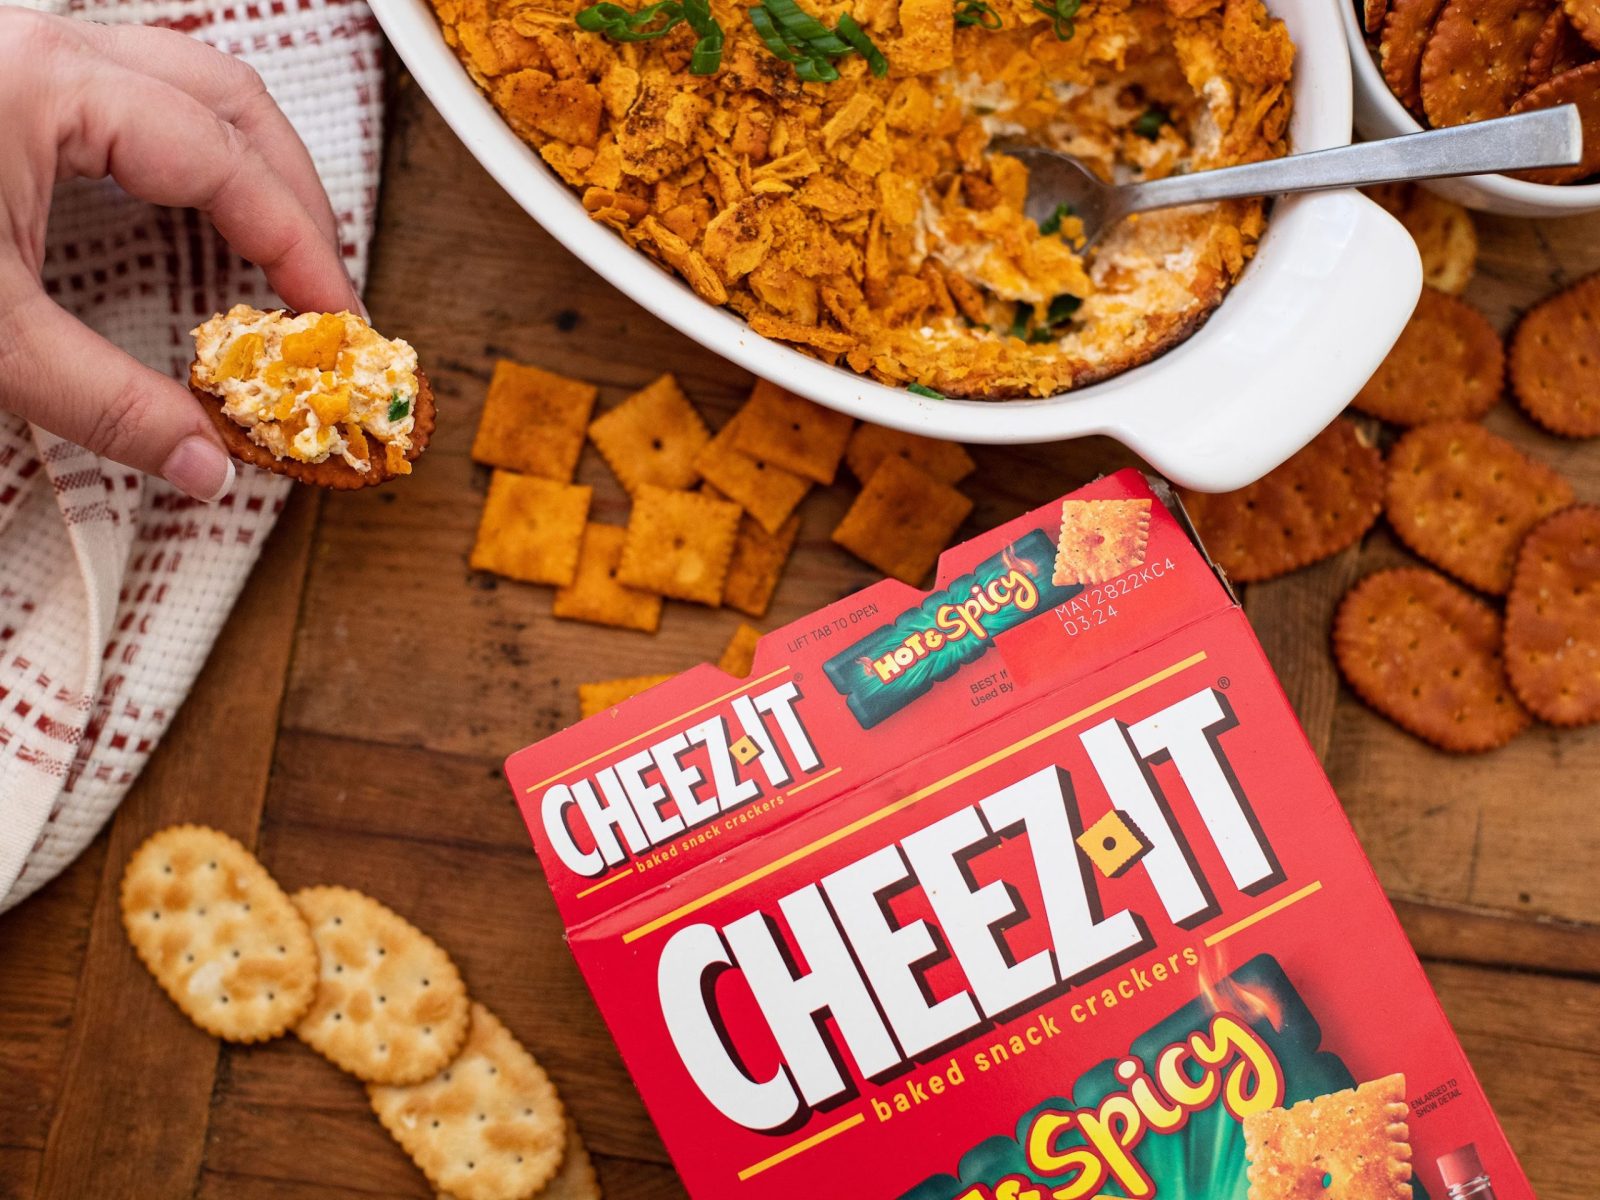 Cheez-It Crackers As Low As $2 At Kroger